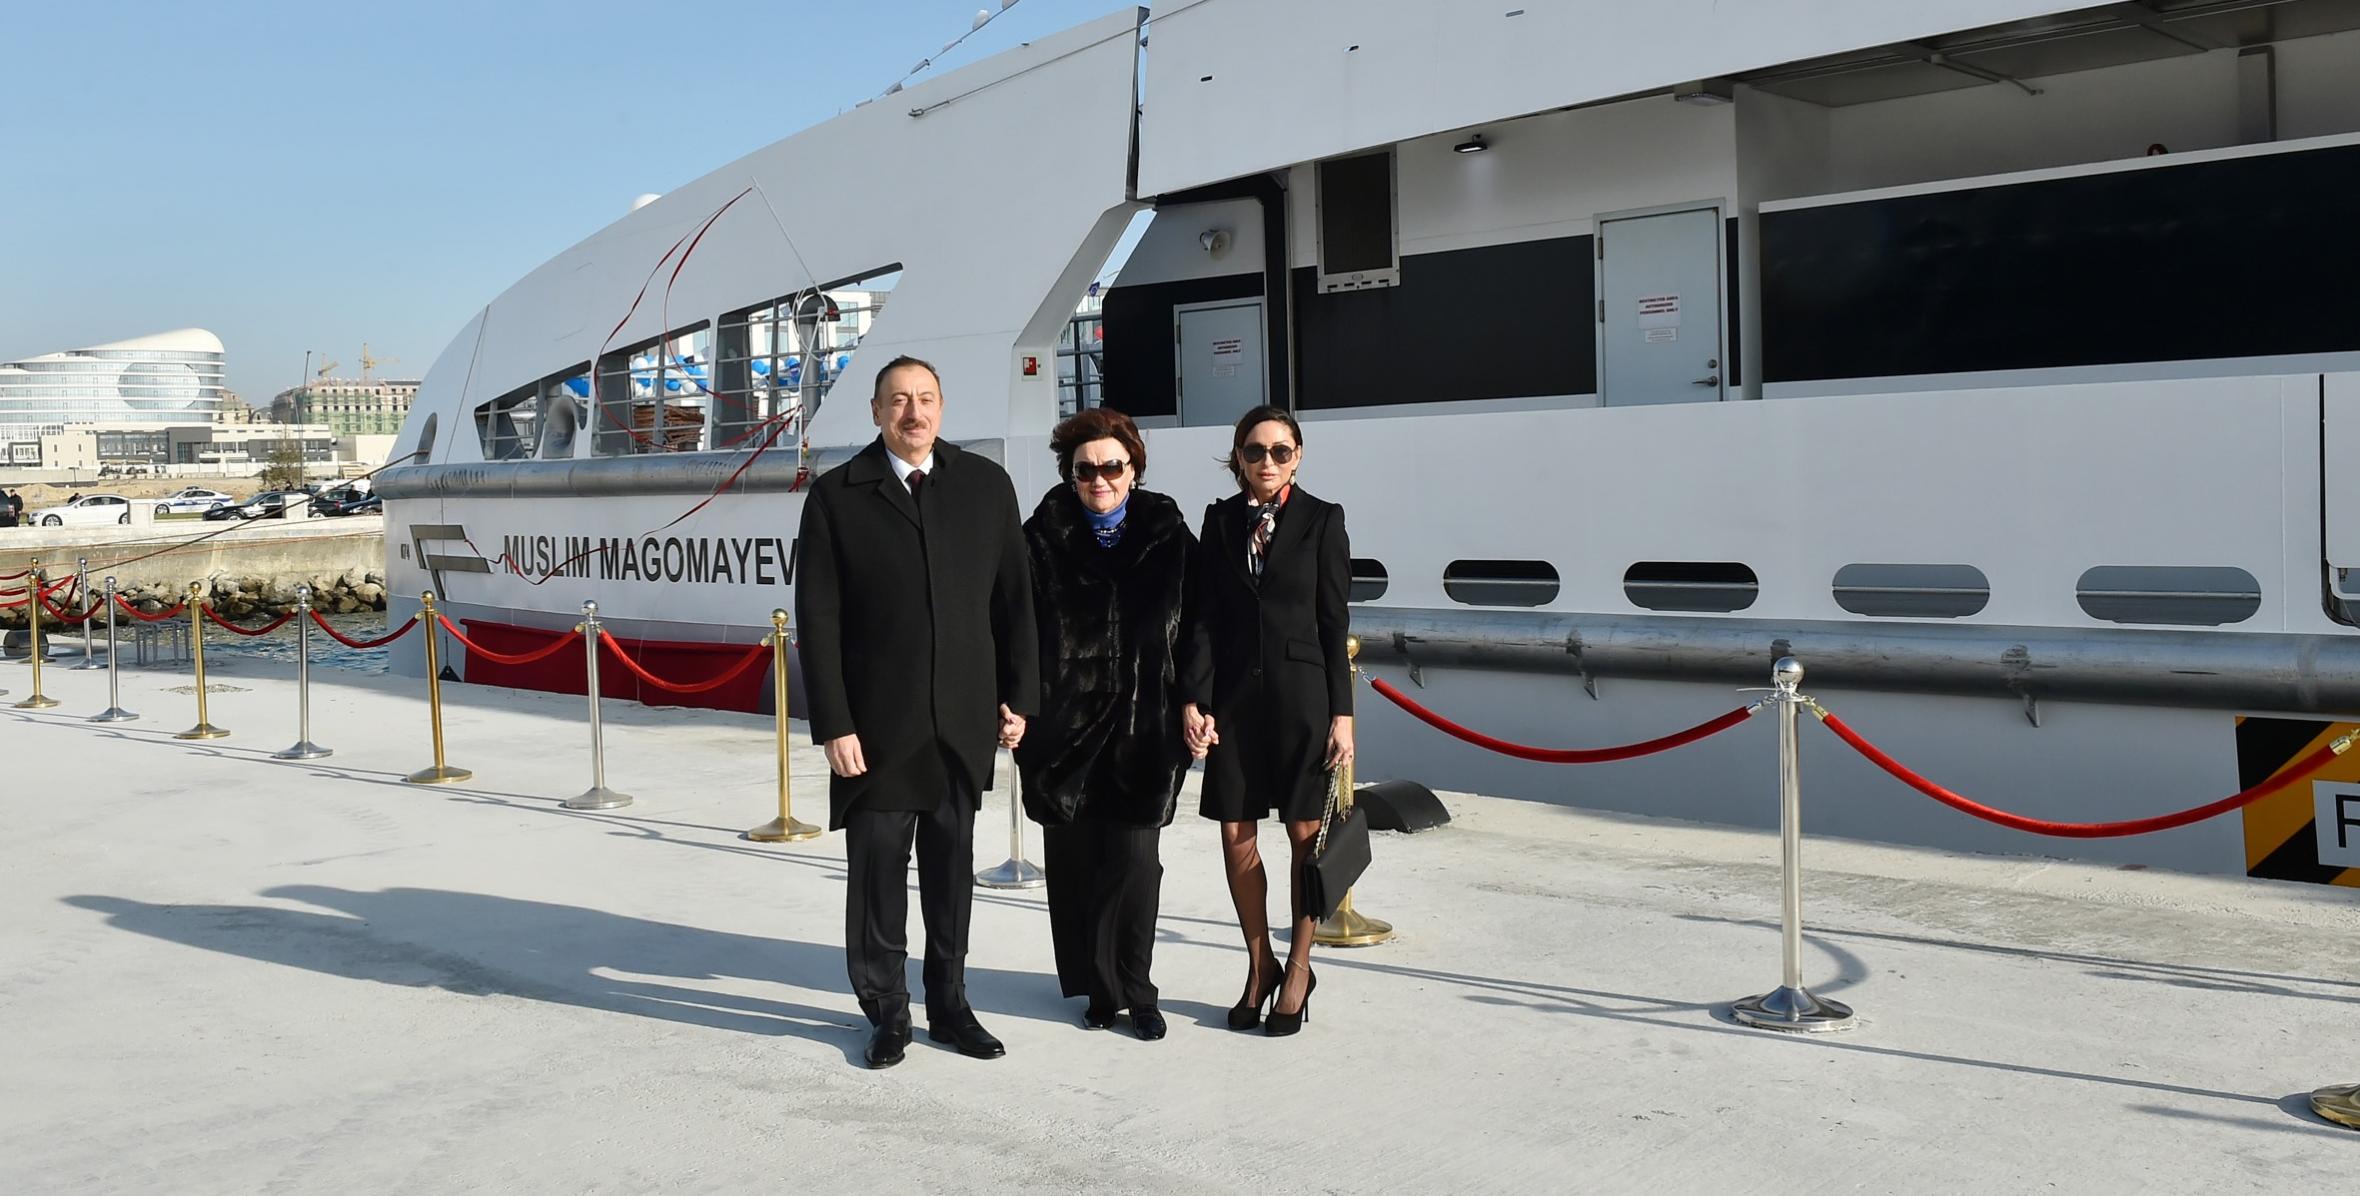 Ilham Aliyev attended a ceremony to inaugurate the fast crew boat after world-renowned singer Muslim Magomayev